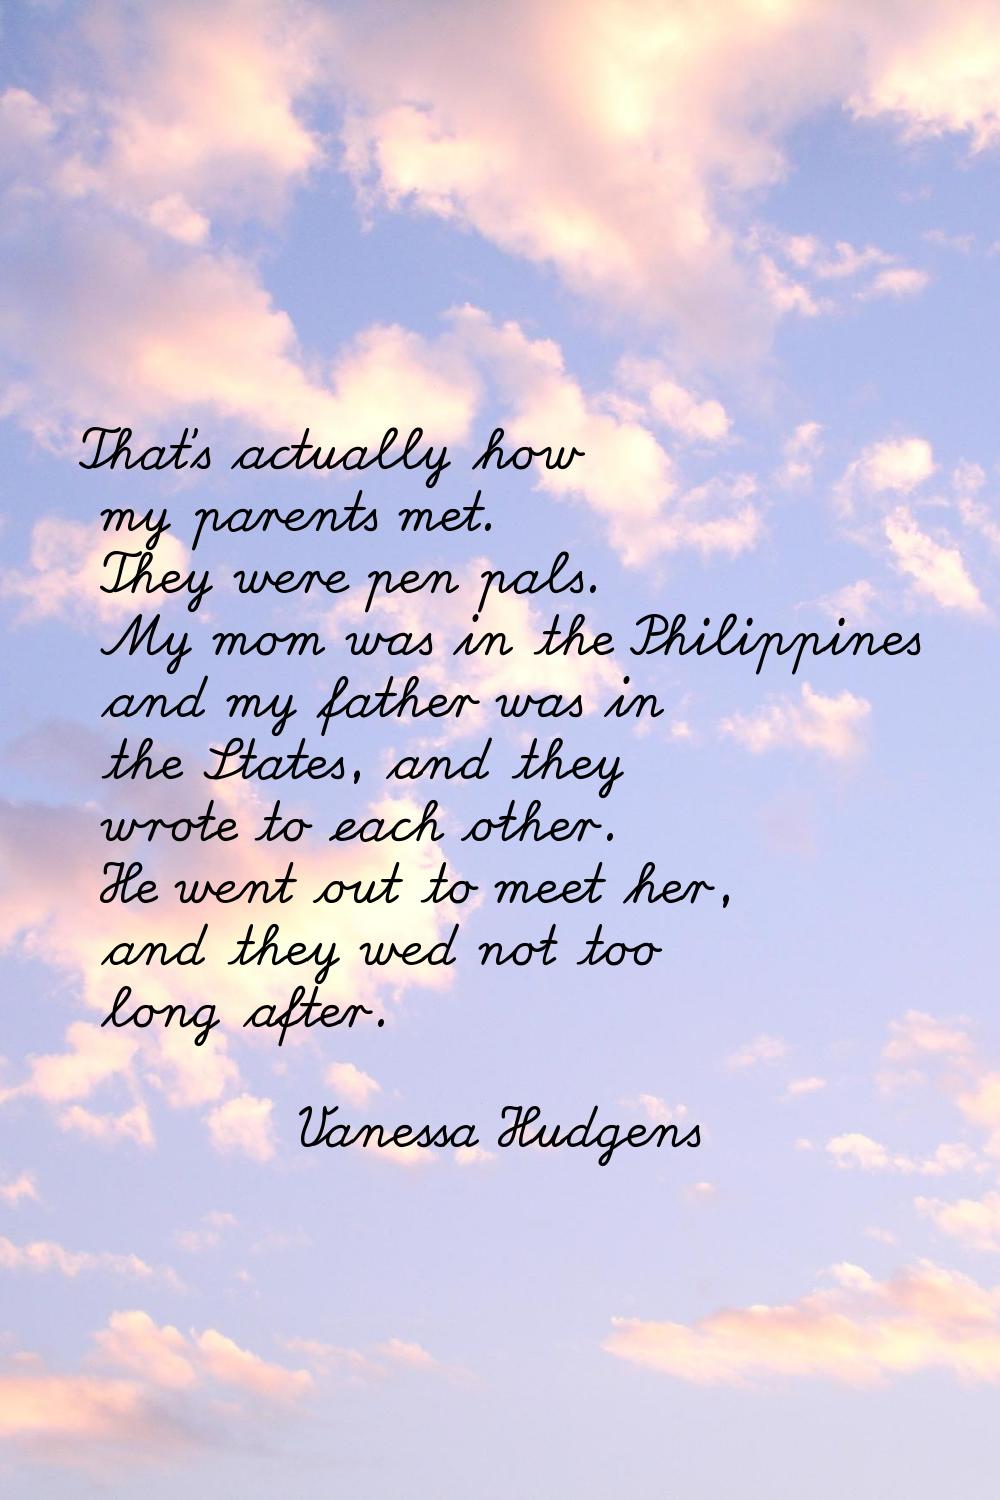 That's actually how my parents met. They were pen pals. My mom was in the Philippines and my father